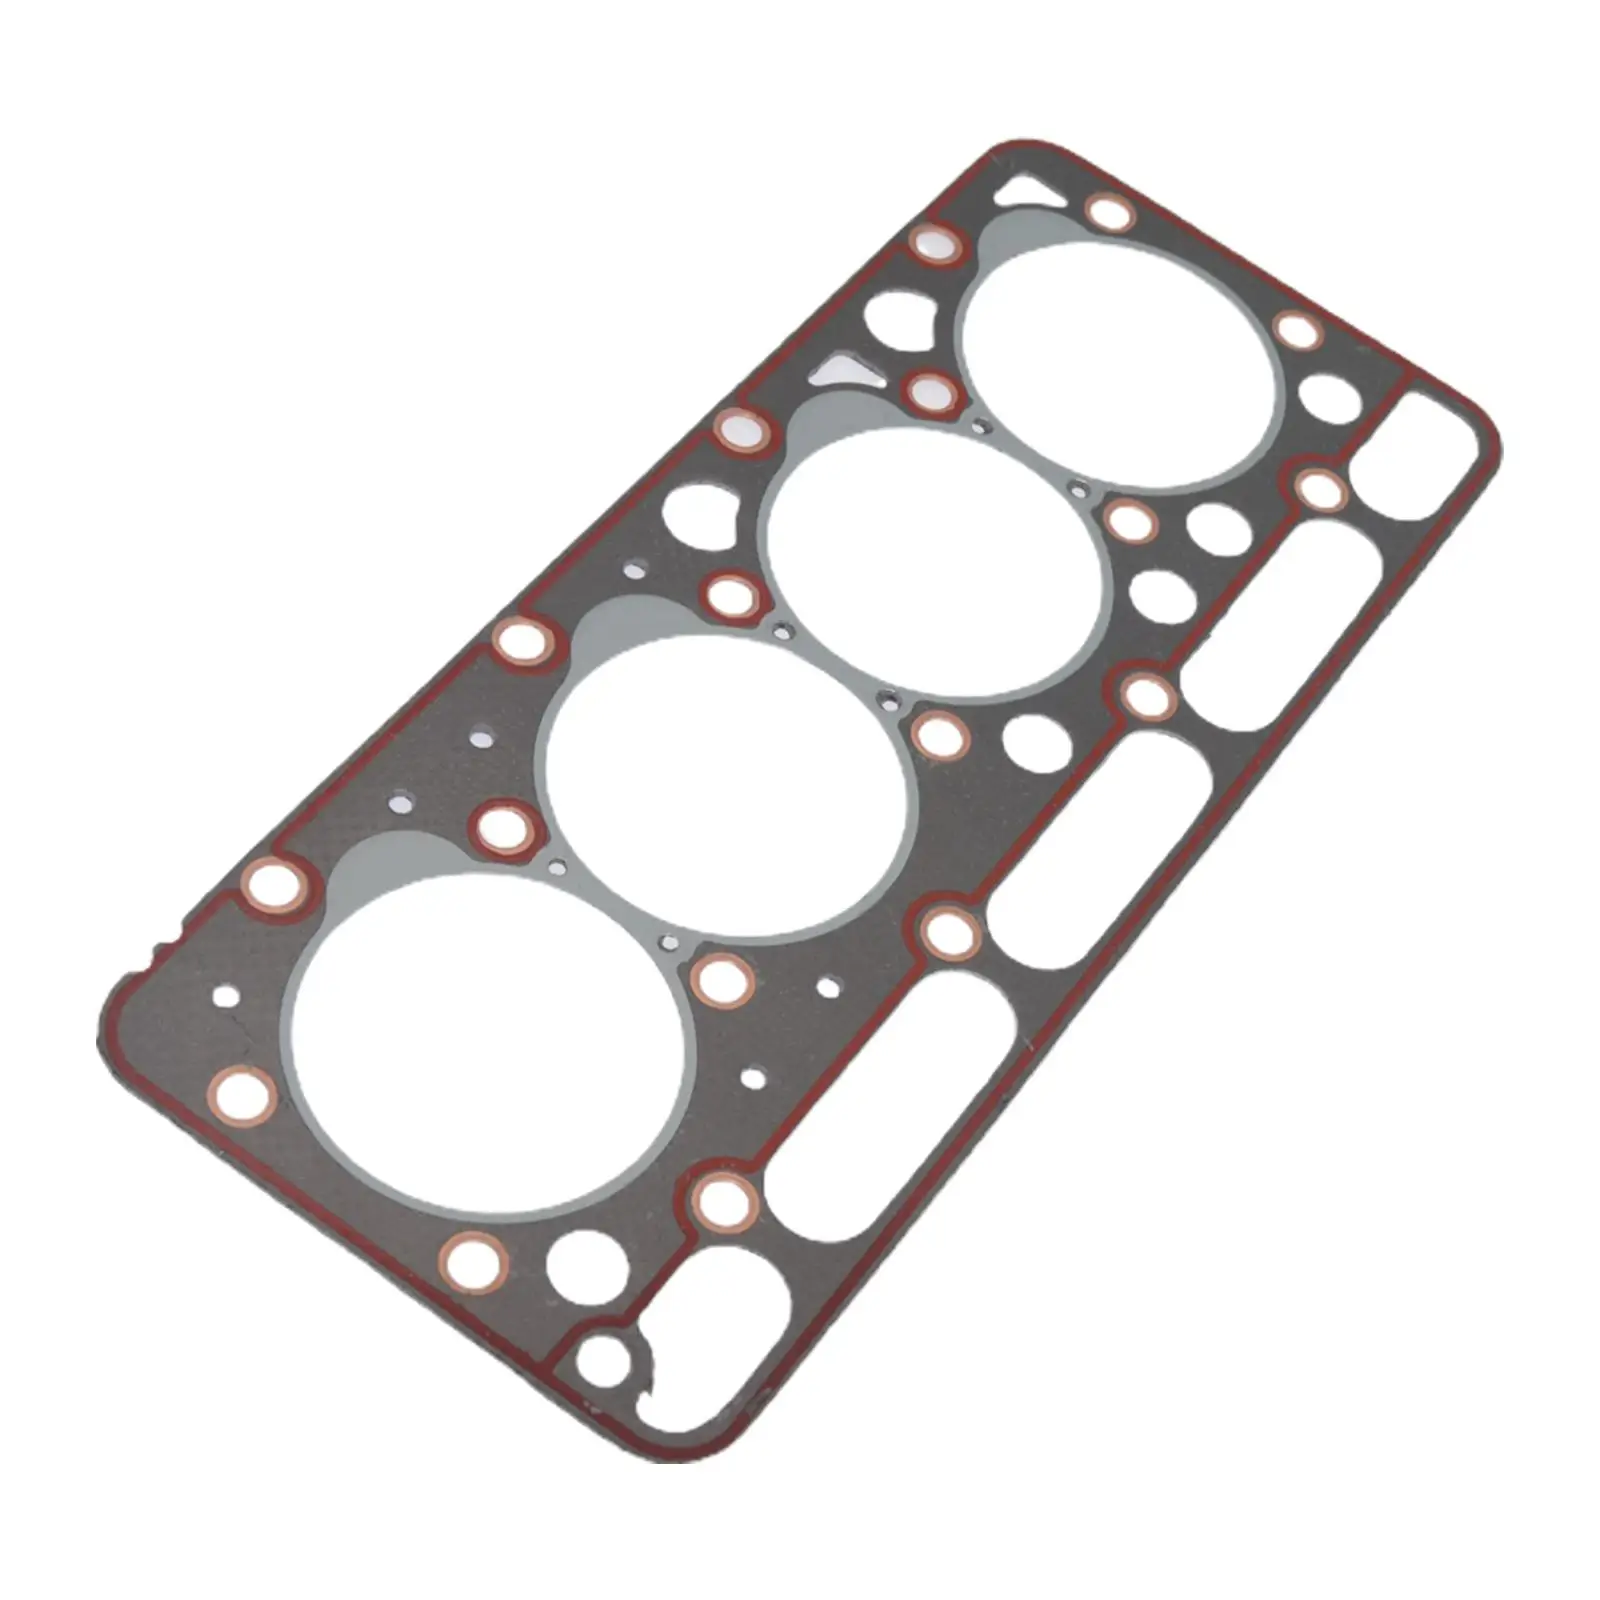 19077-03310 Head Gasket Direct Replaces Accessories High Quality Easy to Install Composite Metal Durable for Kubota Bobcat